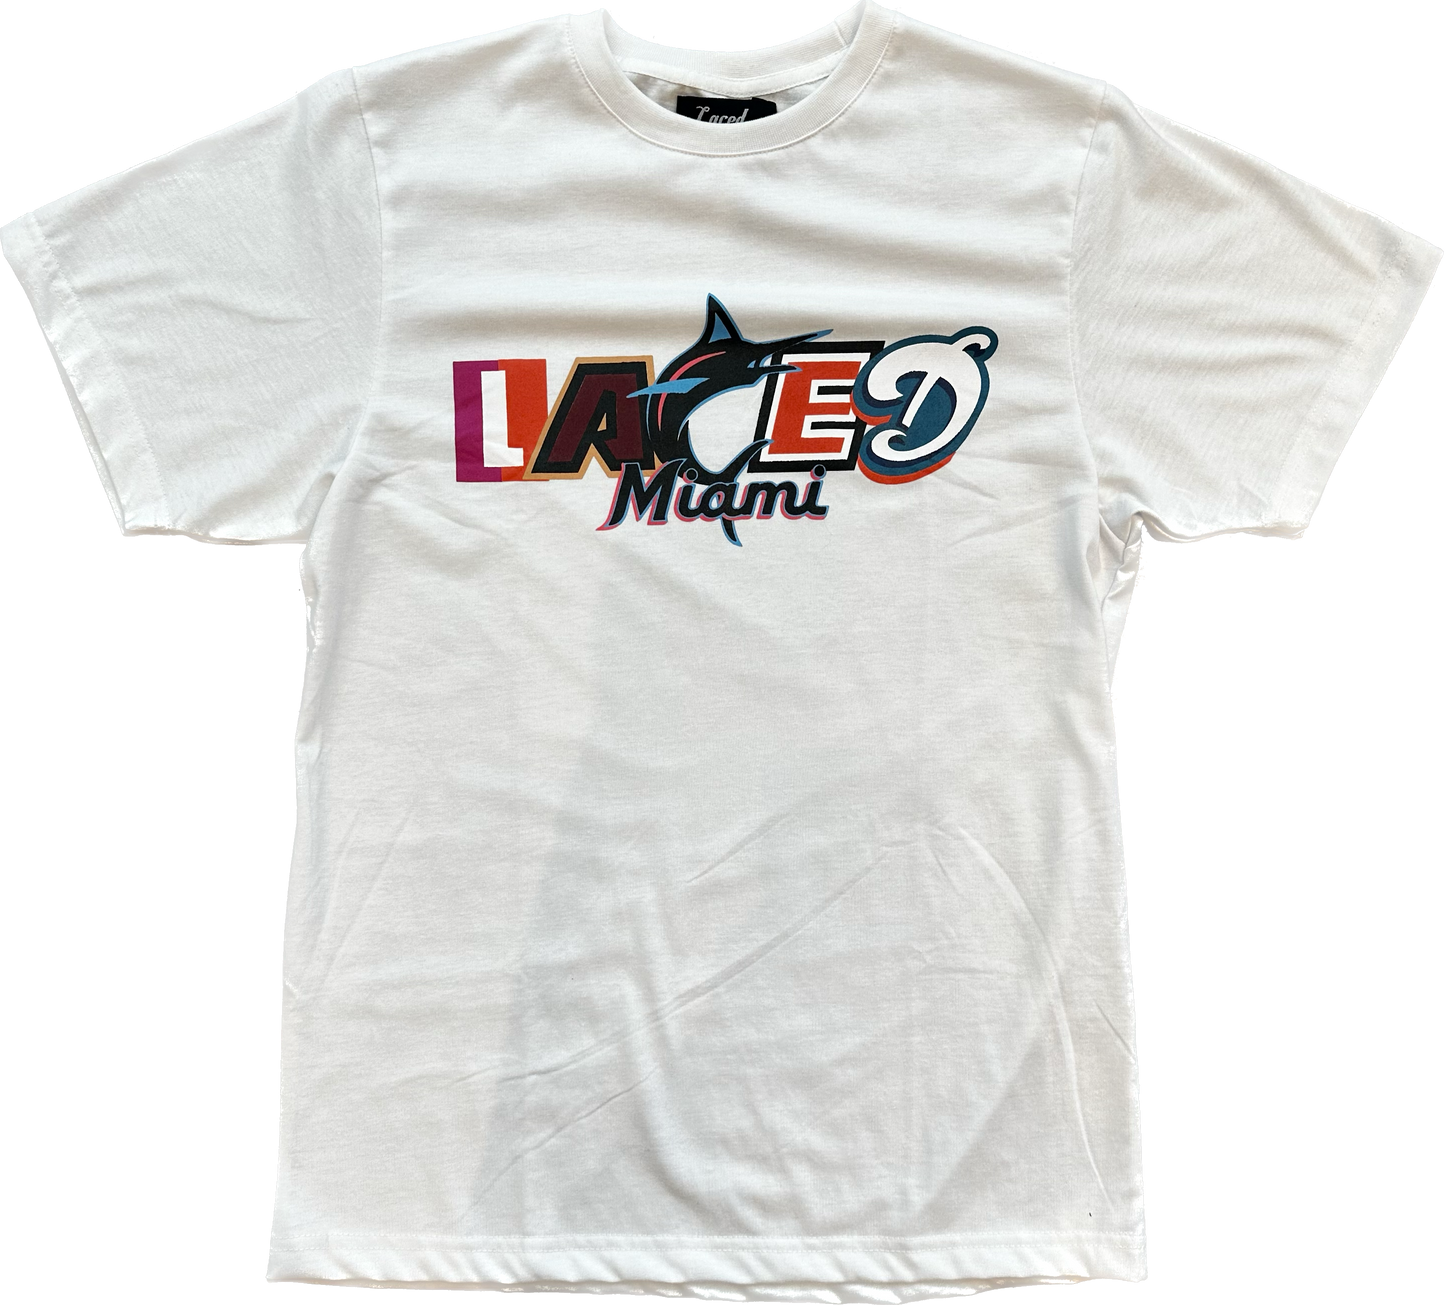 Laced Miami Exclusive Tee